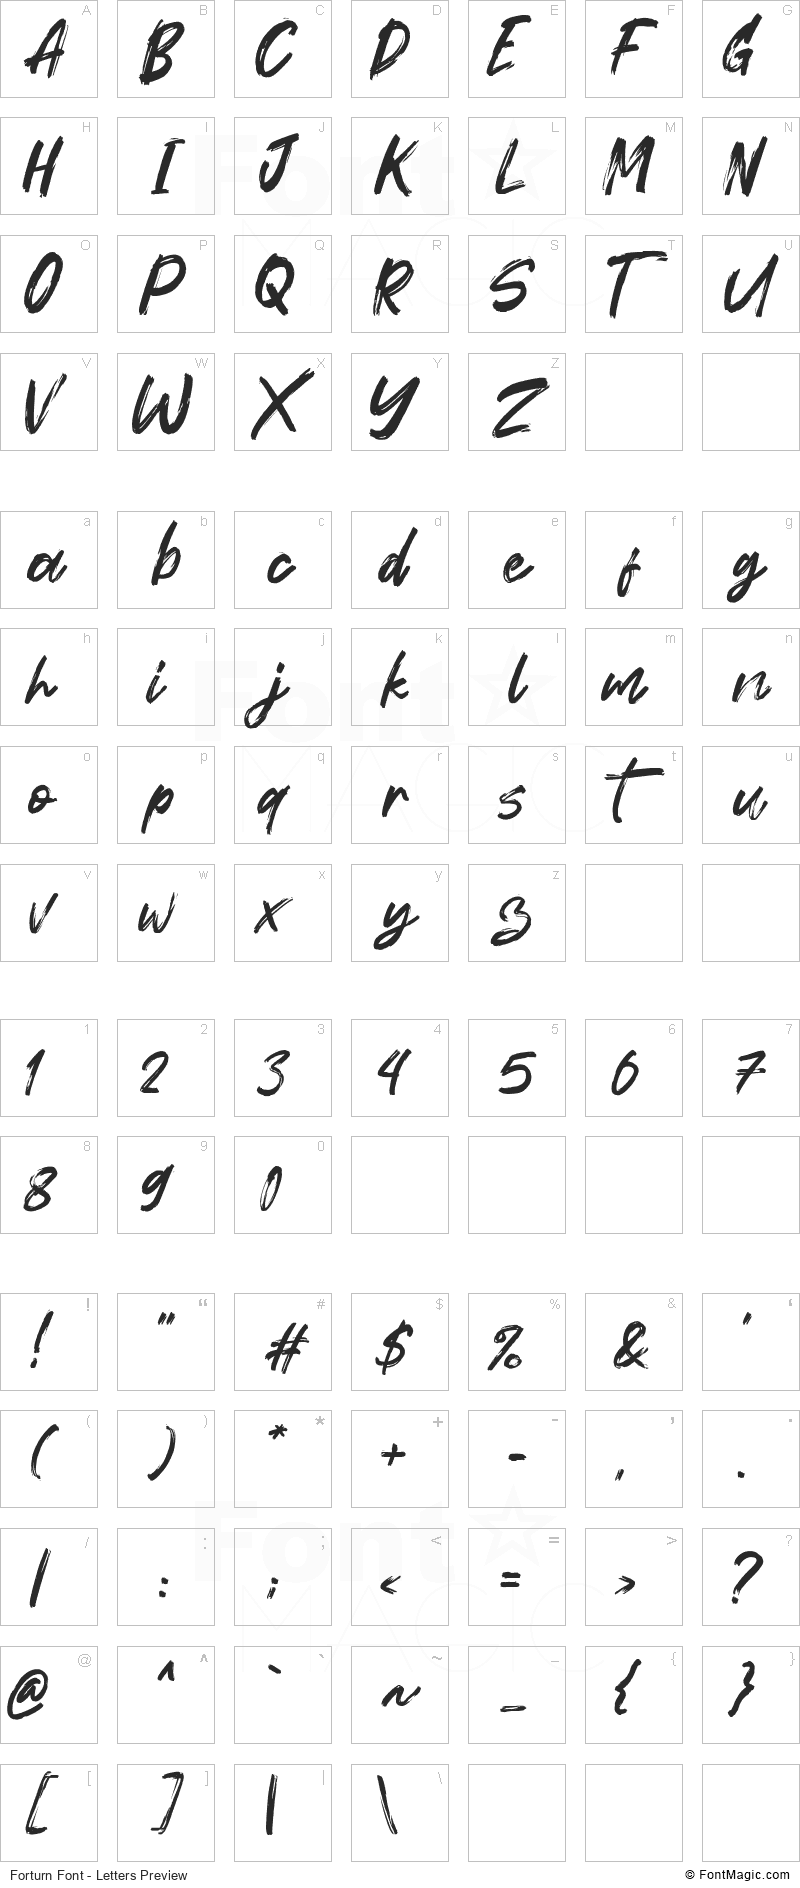 Forturn Font - All Latters Preview Chart